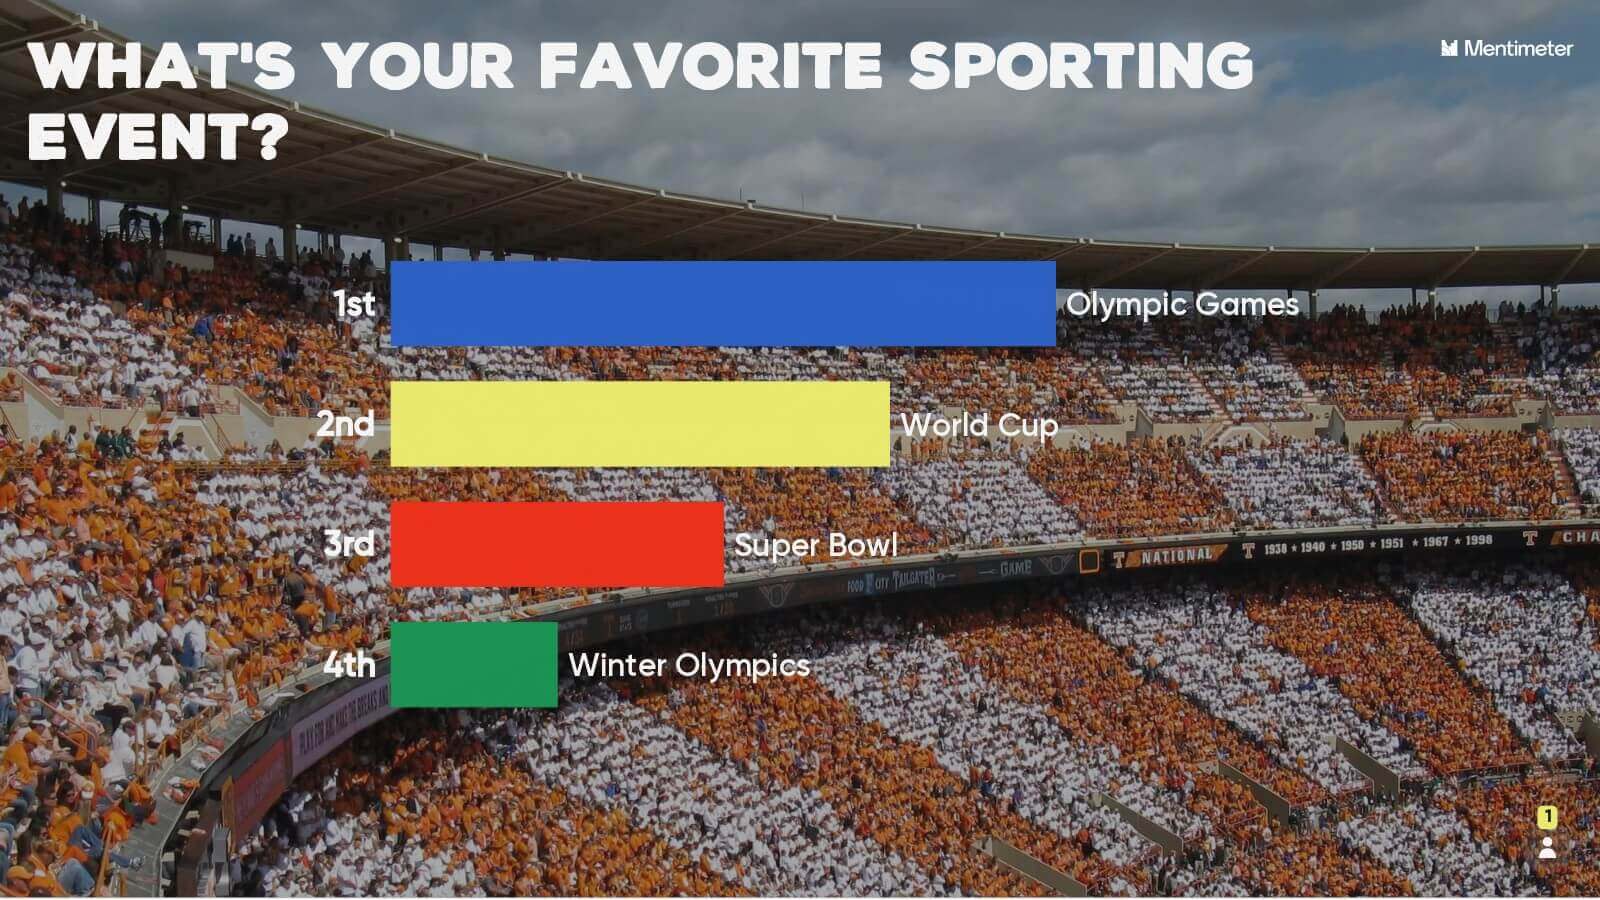 What's Your Favorite Sporting Event?